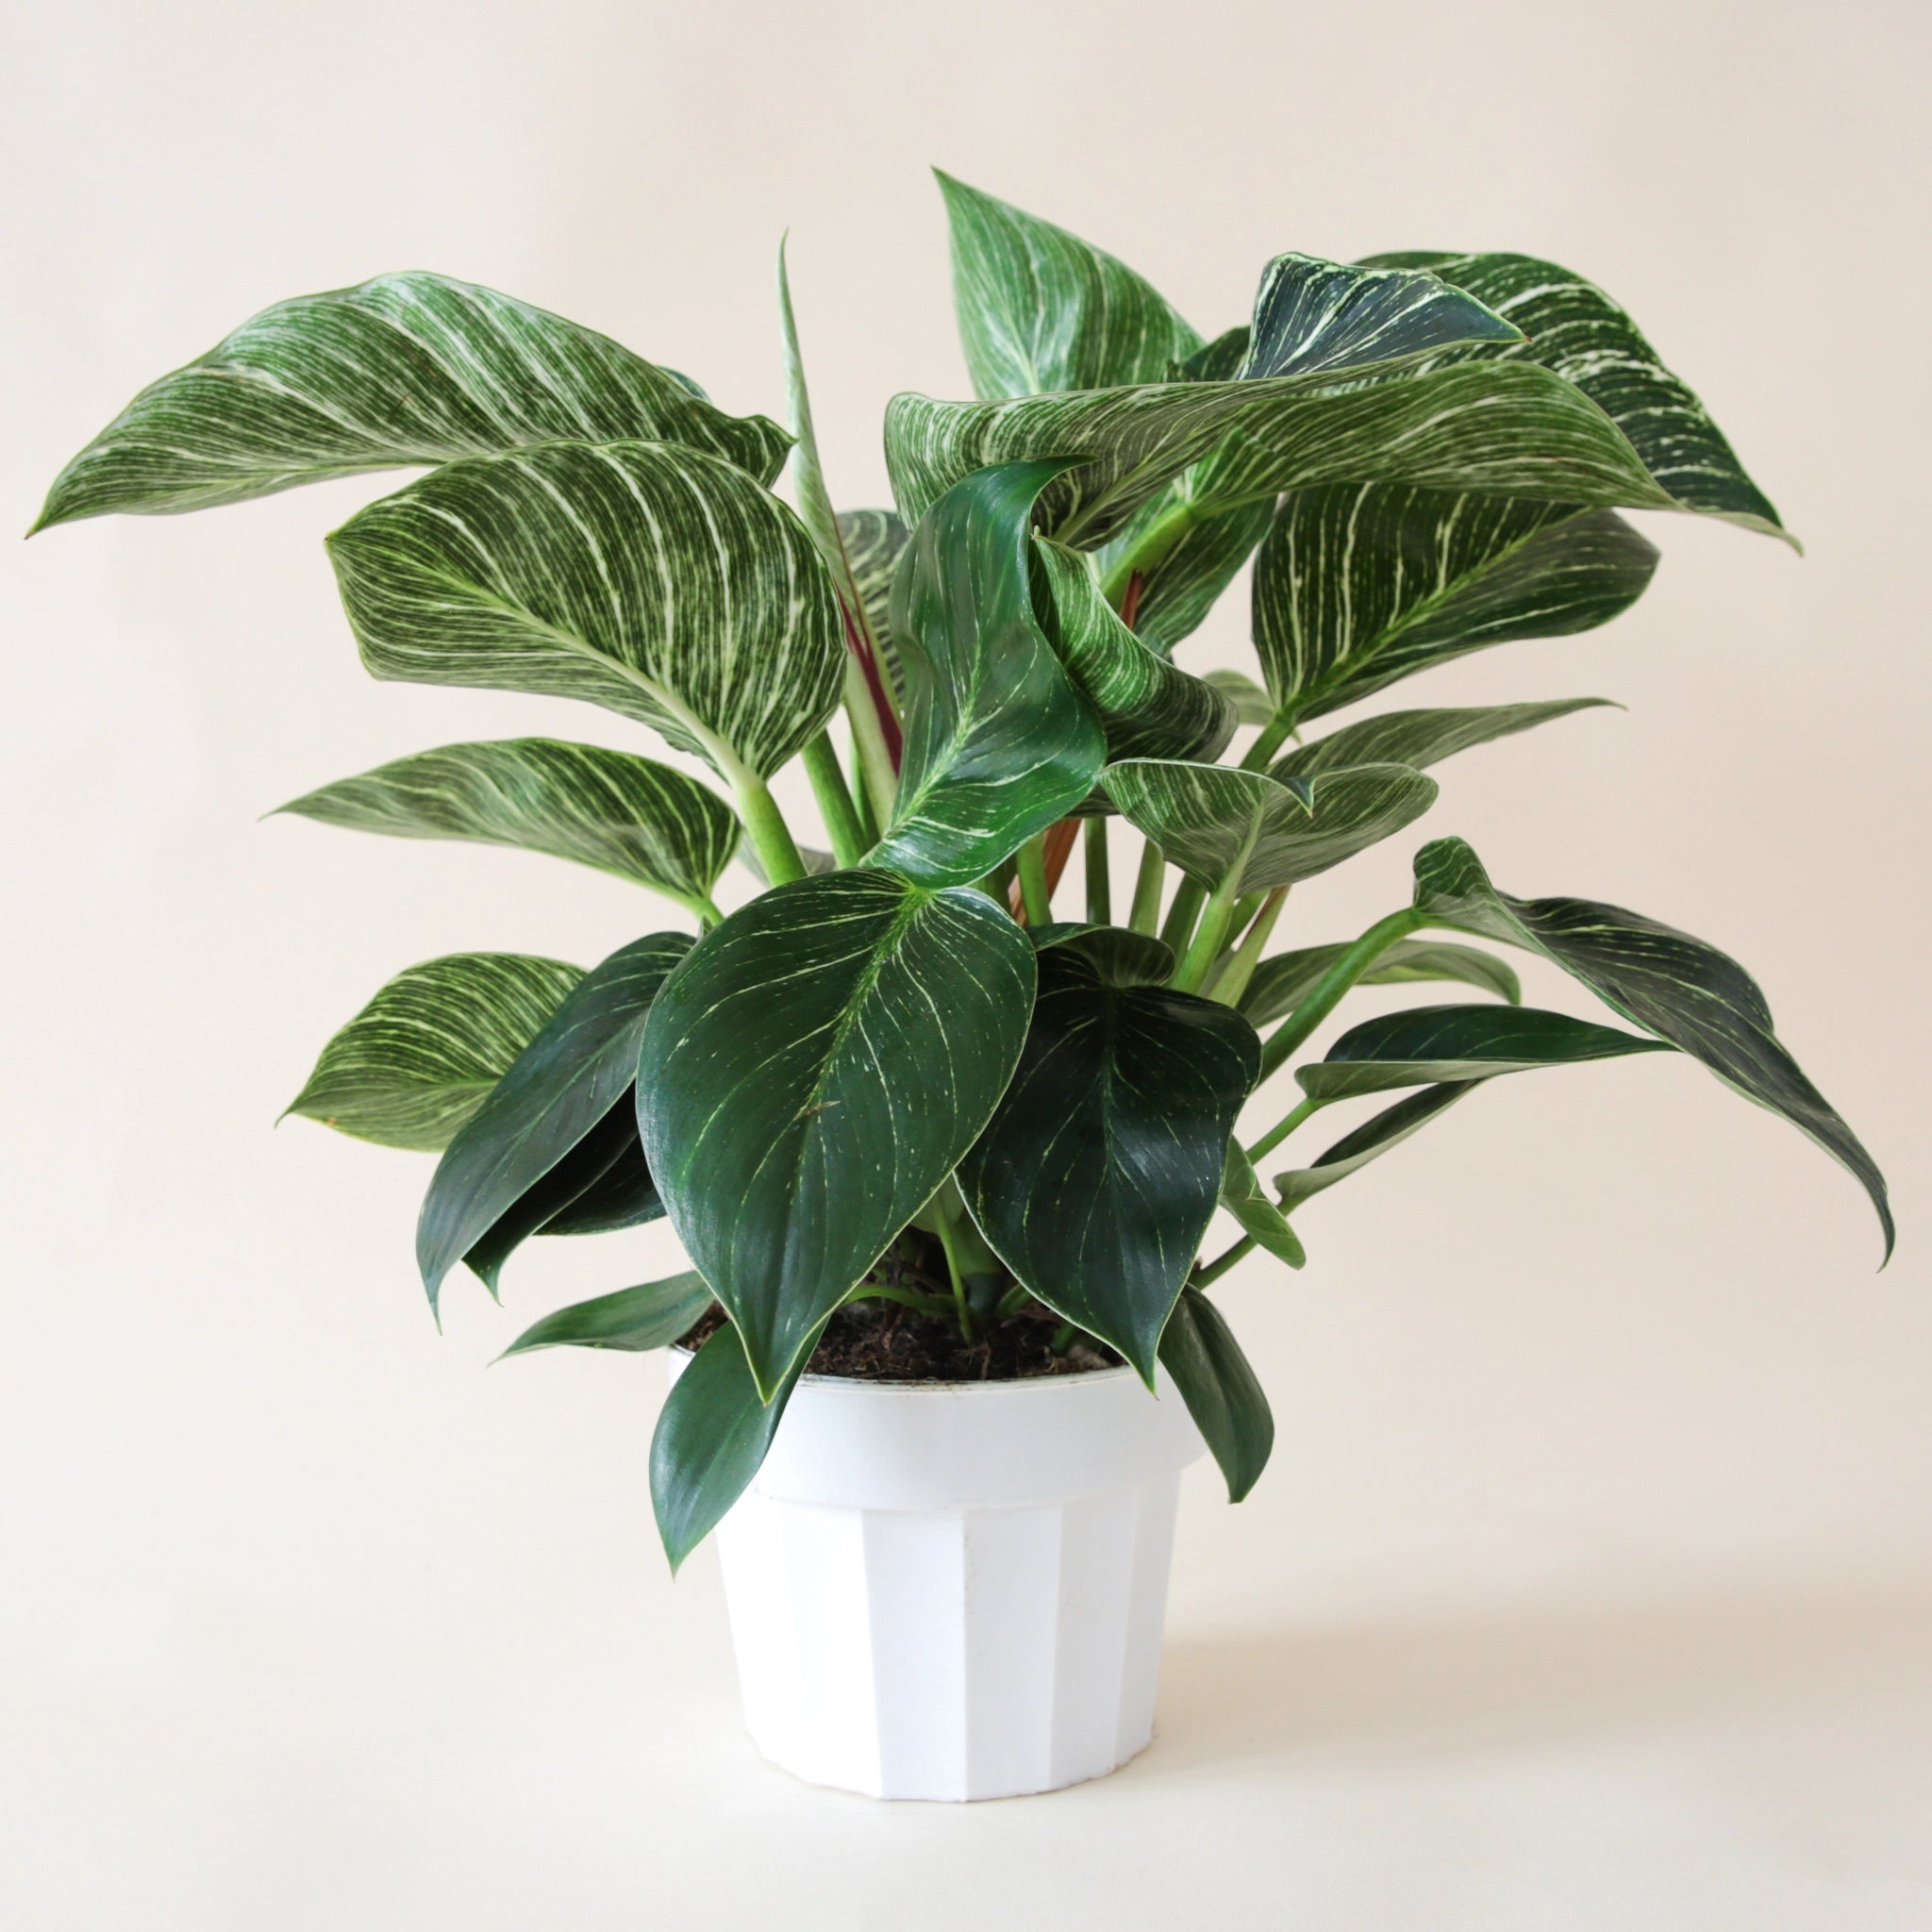 In front of a white background is a round white pot. Inside the pot is a philodendron brikin. The light green stems are tall and stick straight up. Most of the leaves are green and pointed at the top. Some of the leaves have white stripes.